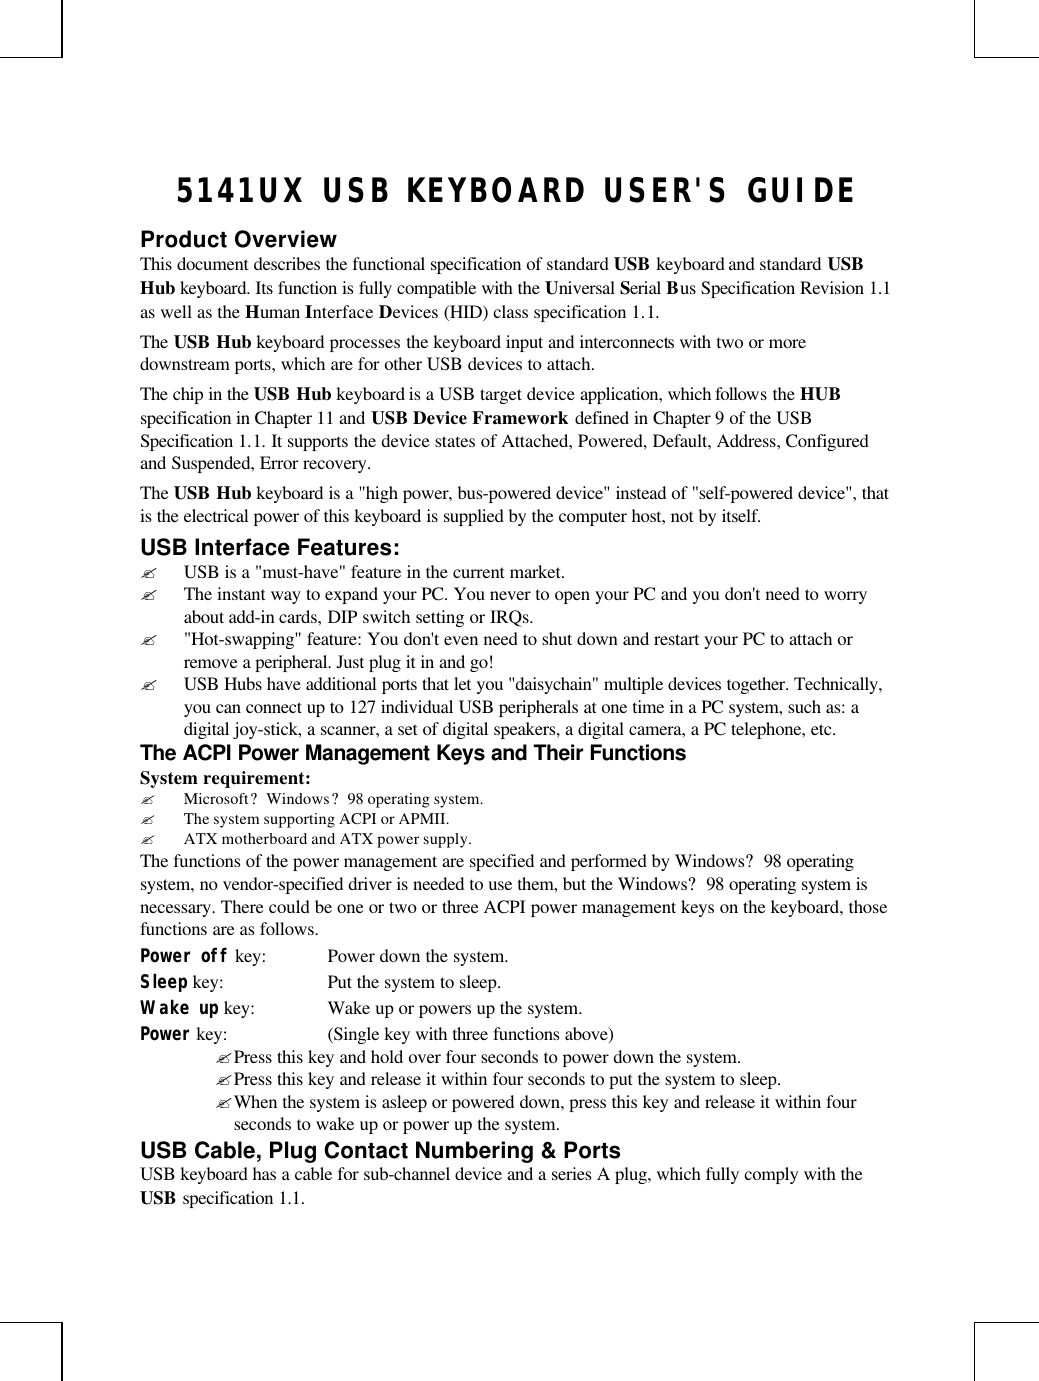 5141UX USB KEYBOARD USER&apos;S GUIDEProduct OverviewThis document describes the functional specification of standard USB keyboard and standard USBHub keyboard. Its function is fully compatible with the Universal Serial Bus Specification Revision 1.1as well as the Human Interface Devices (HID) class specification 1.1.The USB Hub keyboard processes the keyboard input and interconnects with two or moredownstream ports, which are for other USB devices to attach.The chip in the USB Hub keyboard is a USB target device application, which follows the HUBspecification in Chapter 11 and USB Device Framework defined in Chapter 9 of the USBSpecification 1.1. It supports the device states of Attached, Powered, Default, Address, Configuredand Suspended, Error recovery.The USB Hub keyboard is a &quot;high power, bus-powered device&quot; instead of &quot;self-powered device&quot;, thatis the electrical power of this keyboard is supplied by the computer host, not by itself.USB Interface Features:? USB is a &quot;must-have&quot; feature in the current market.? The instant way to expand your PC. You never to open your PC and you don&apos;t need to worryabout add-in cards, DIP switch setting or IRQs.? &quot;Hot-swapping&quot; feature: You don&apos;t even need to shut down and restart your PC to attach orremove a peripheral. Just plug it in and go!? USB Hubs have additional ports that let you &quot;daisychain&quot; multiple devices together. Technically,you can connect up to 127 individual USB peripherals at one time in a PC system, such as: adigital joy-stick, a scanner, a set of digital speakers, a digital camera, a PC telephone, etc.The ACPI Power Management Keys and Their FunctionsSystem requirement:? Microsoft? Windows? 98 operating system.? The system supporting ACPI or APMII.? ATX motherboard and ATX power supply.The functions of the power management are specified and performed by Windows? 98 operatingsystem, no vendor-specified driver is needed to use them, but the Windows? 98 operating system isnecessary. There could be one or two or three ACPI power management keys on the keyboard, thosefunctions are as follows.Power off key: Power down the system.Sleep key: Put the system to sleep.Wake up key: Wake up or powers up the system.Power key: (Single key with three functions above)? Press this key and hold over four seconds to power down the system.? Press this key and release it within four seconds to put the system to sleep.? When the system is asleep or powered down, press this key and release it within fourseconds to wake up or power up the system.USB Cable, Plug Contact Numbering &amp; PortsUSB keyboard has a cable for sub-channel device and a series A plug, which fully comply with theUSB specification 1.1.